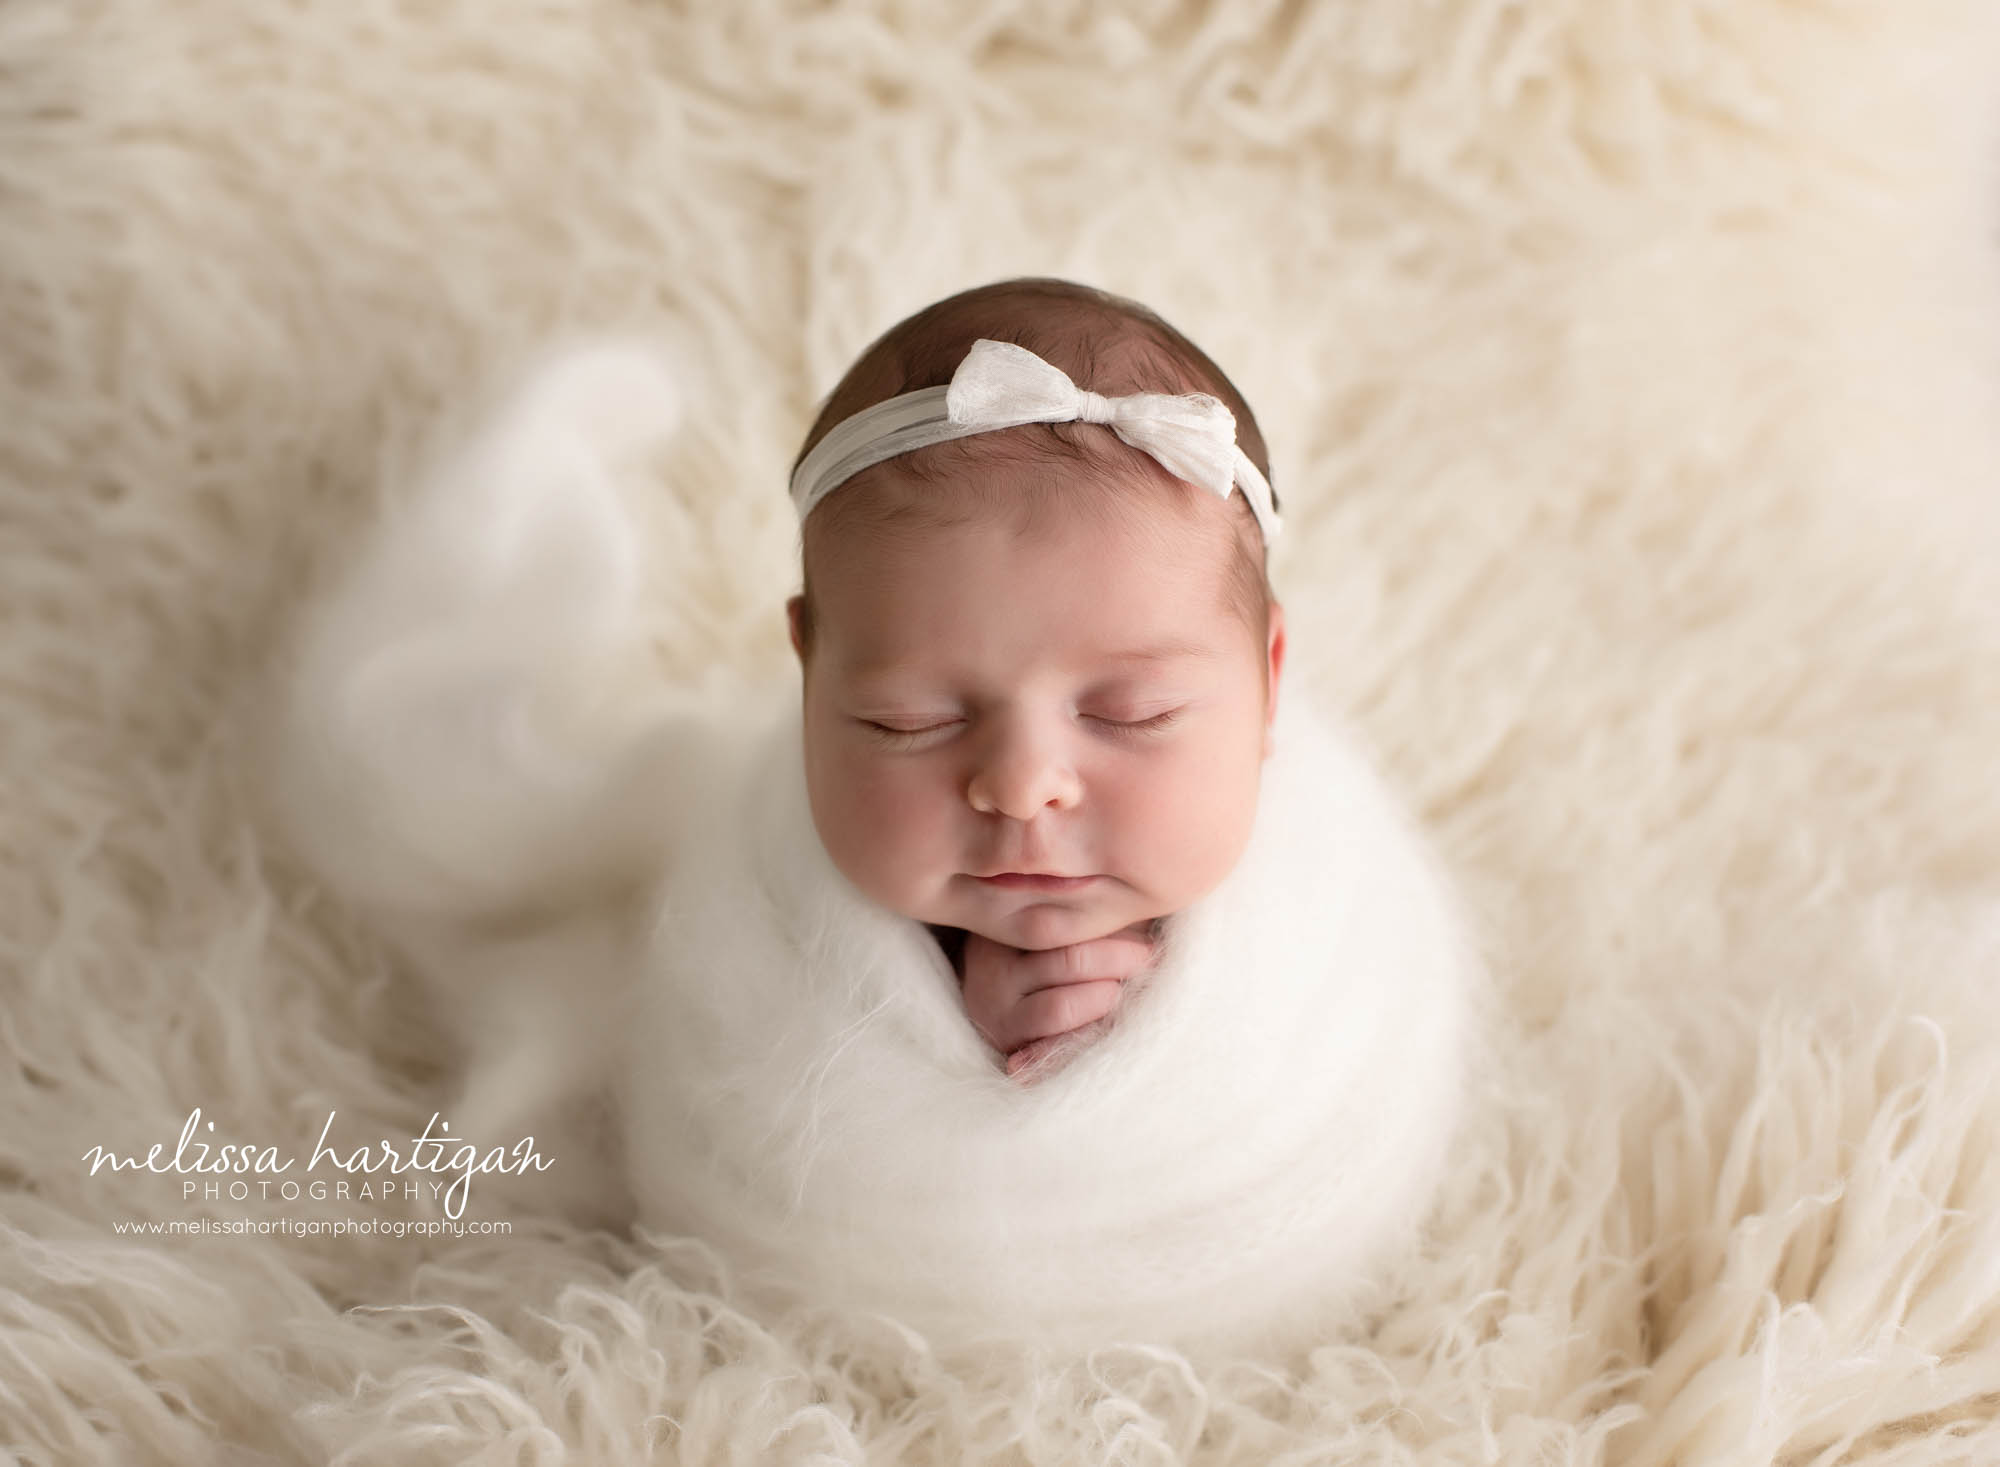 Newborn baby girl wrapped in white knitted wrap and white bow headband CT newborn photography session